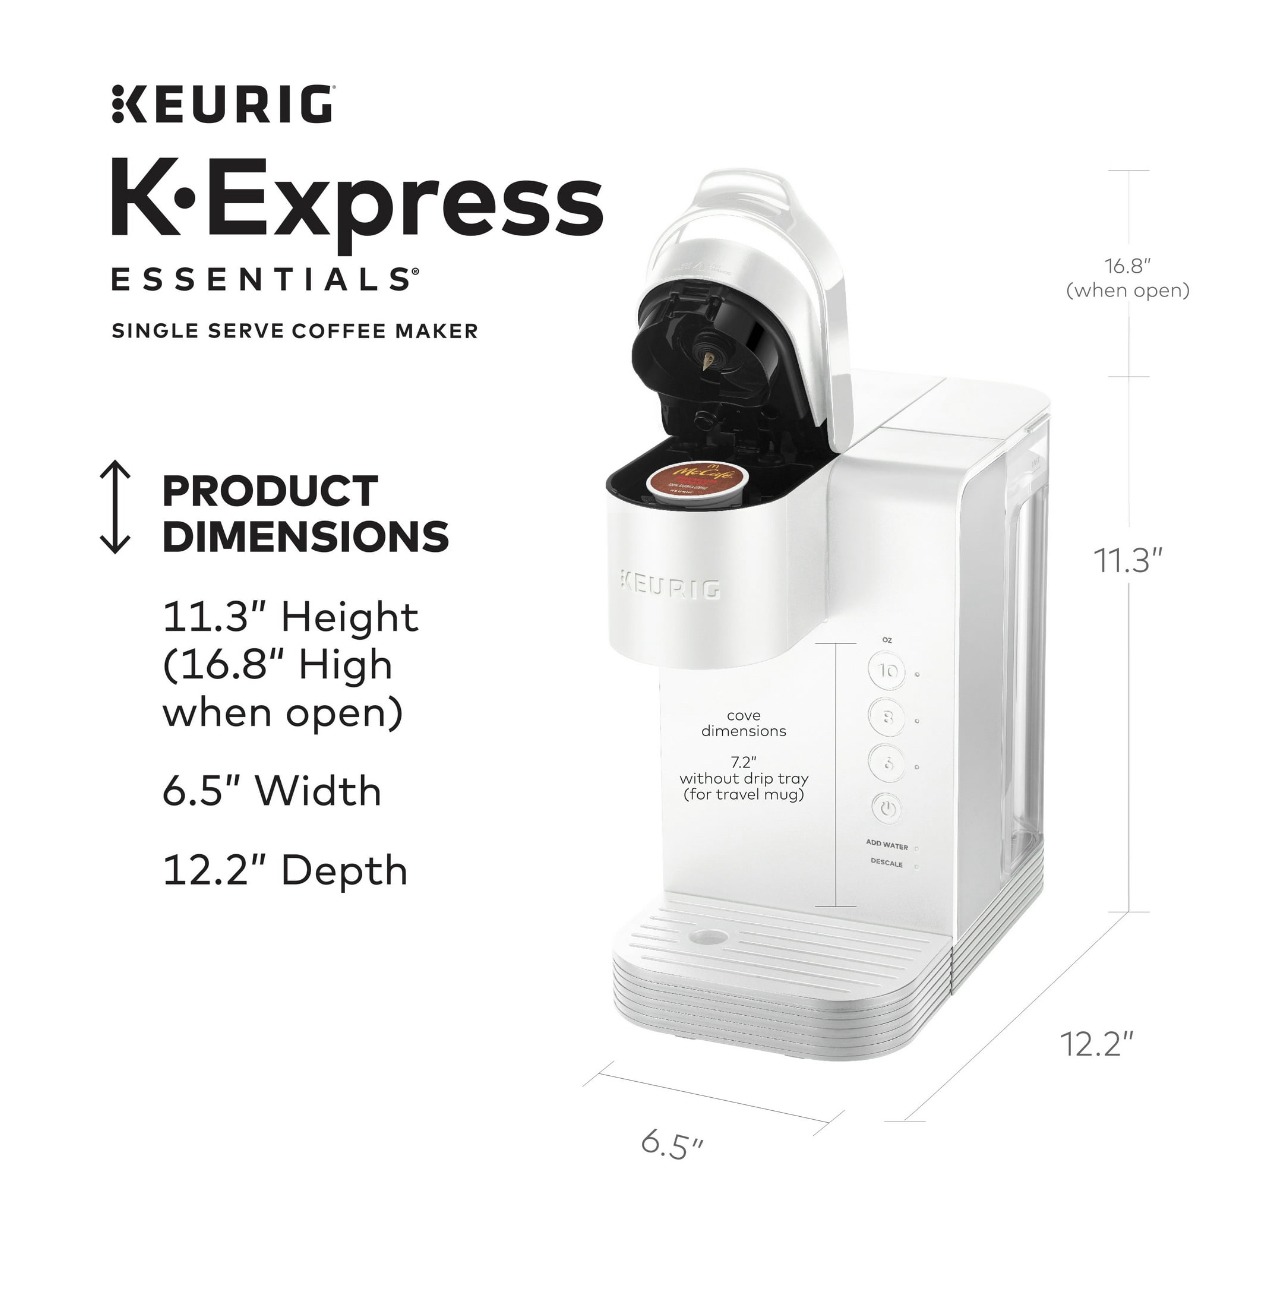 Keurig K-Express Single Serving Coffee Maker has a STRONG button